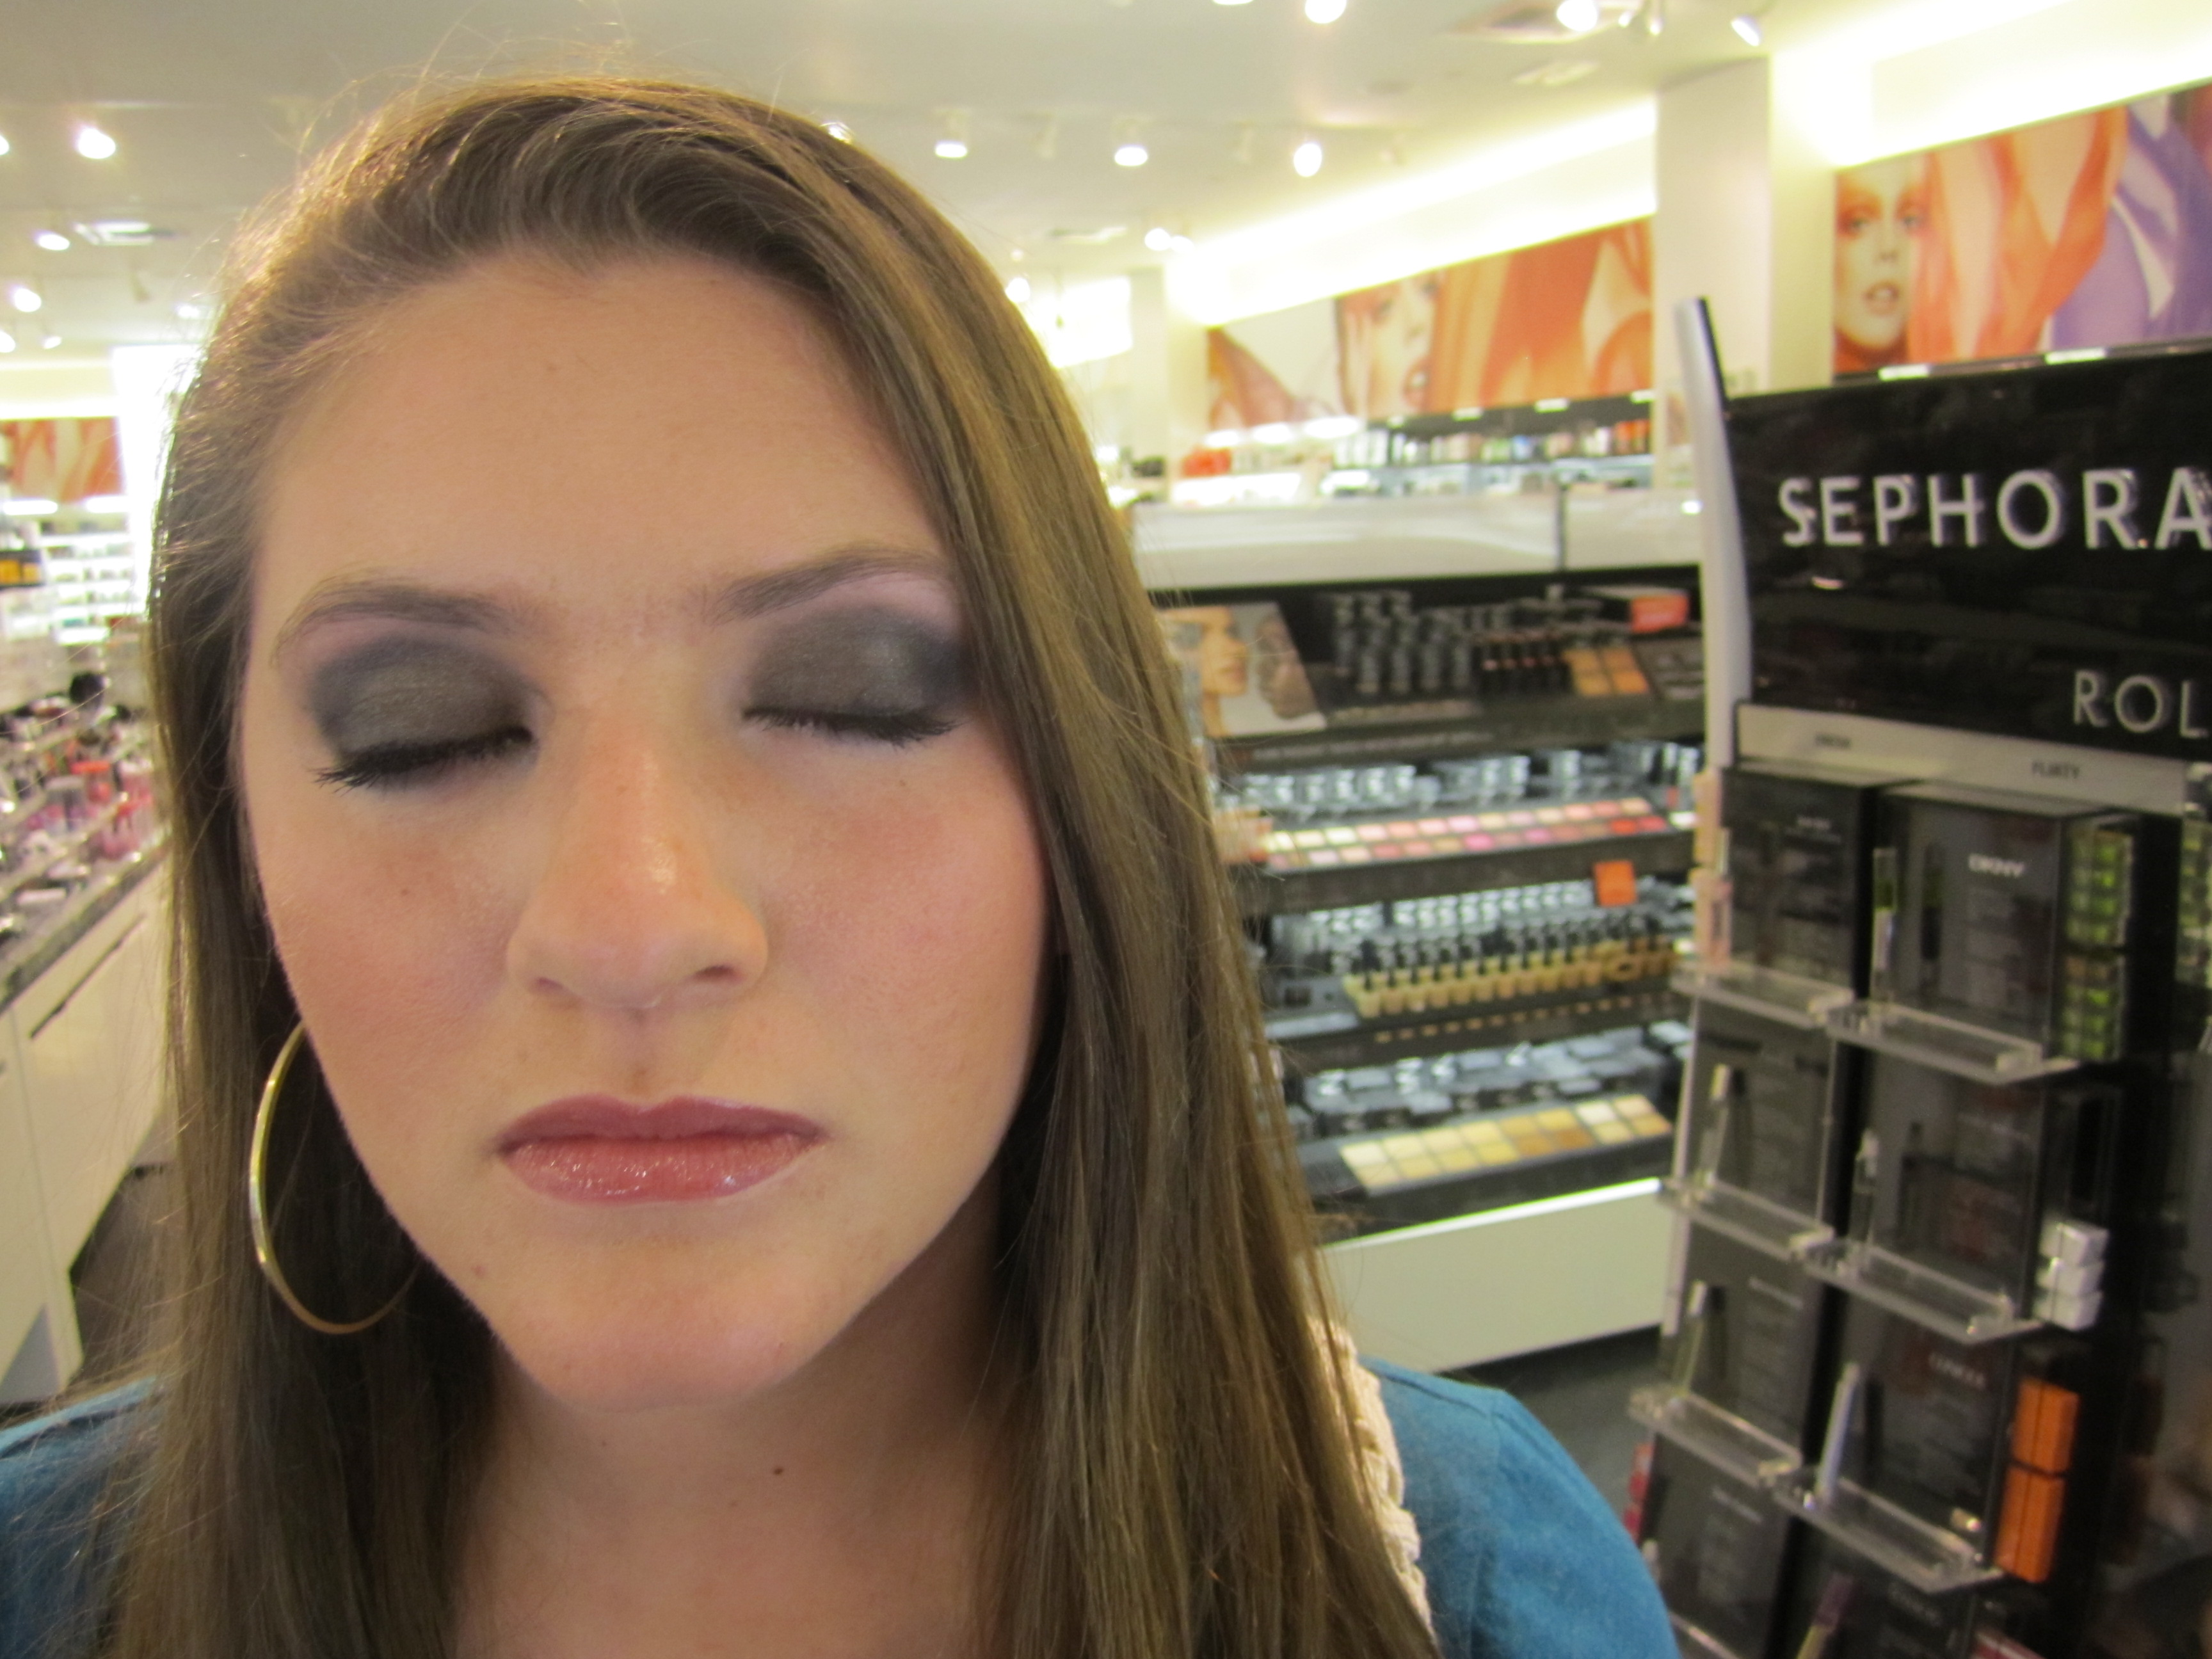 Makeup Done At Sephora For Prom.